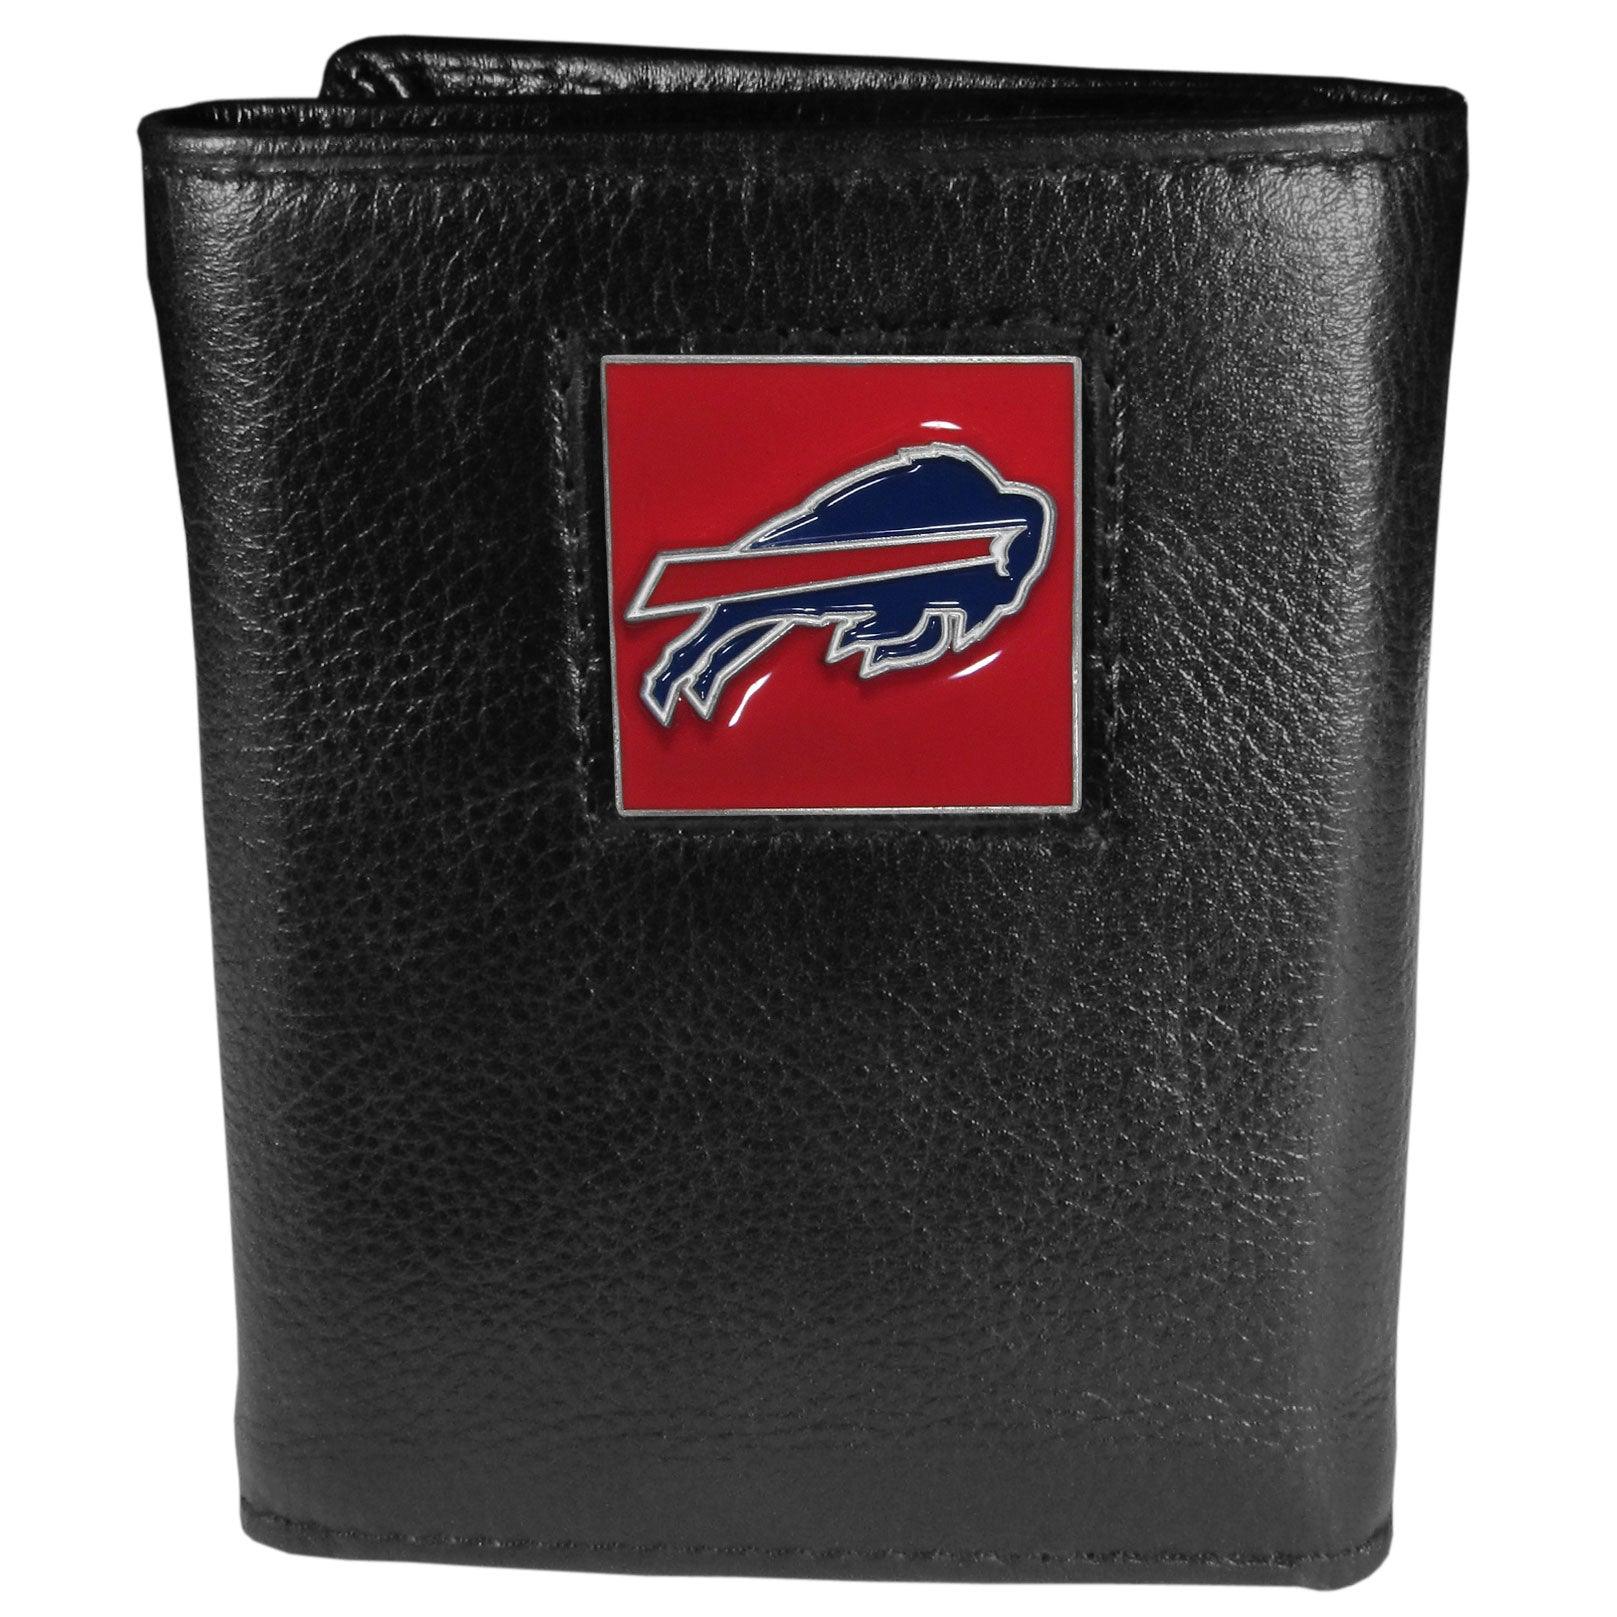 Buffalo Bills Deluxe Leather Tri-fold Wallet Packaged in Gift Box - Flyclothing LLC